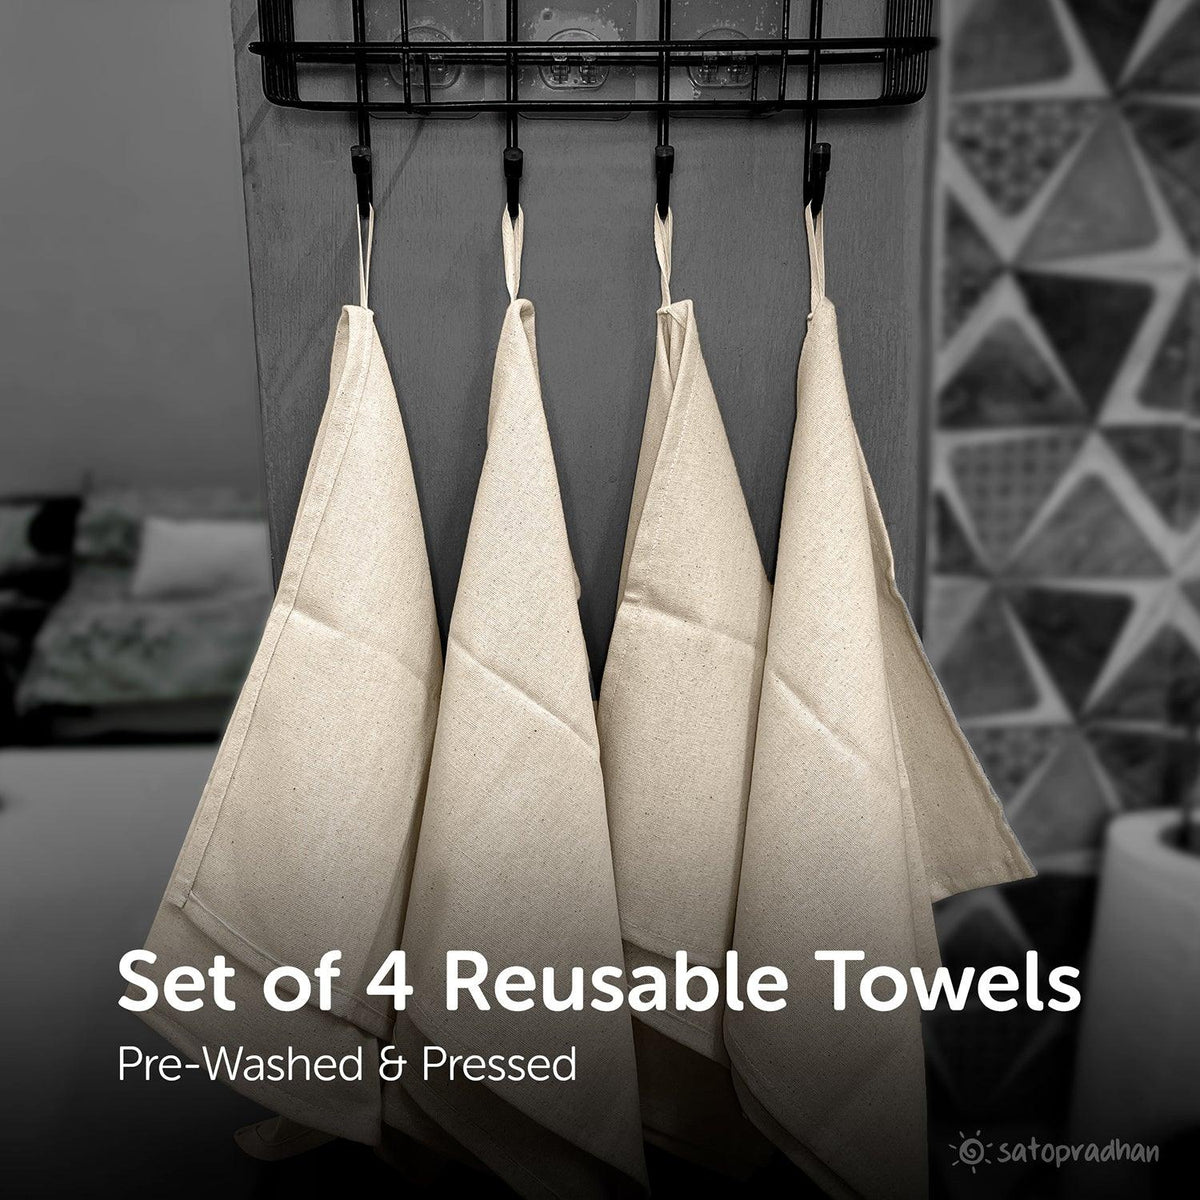 The kitchen towels are pre-washed and pressed to make it ready for the instant use